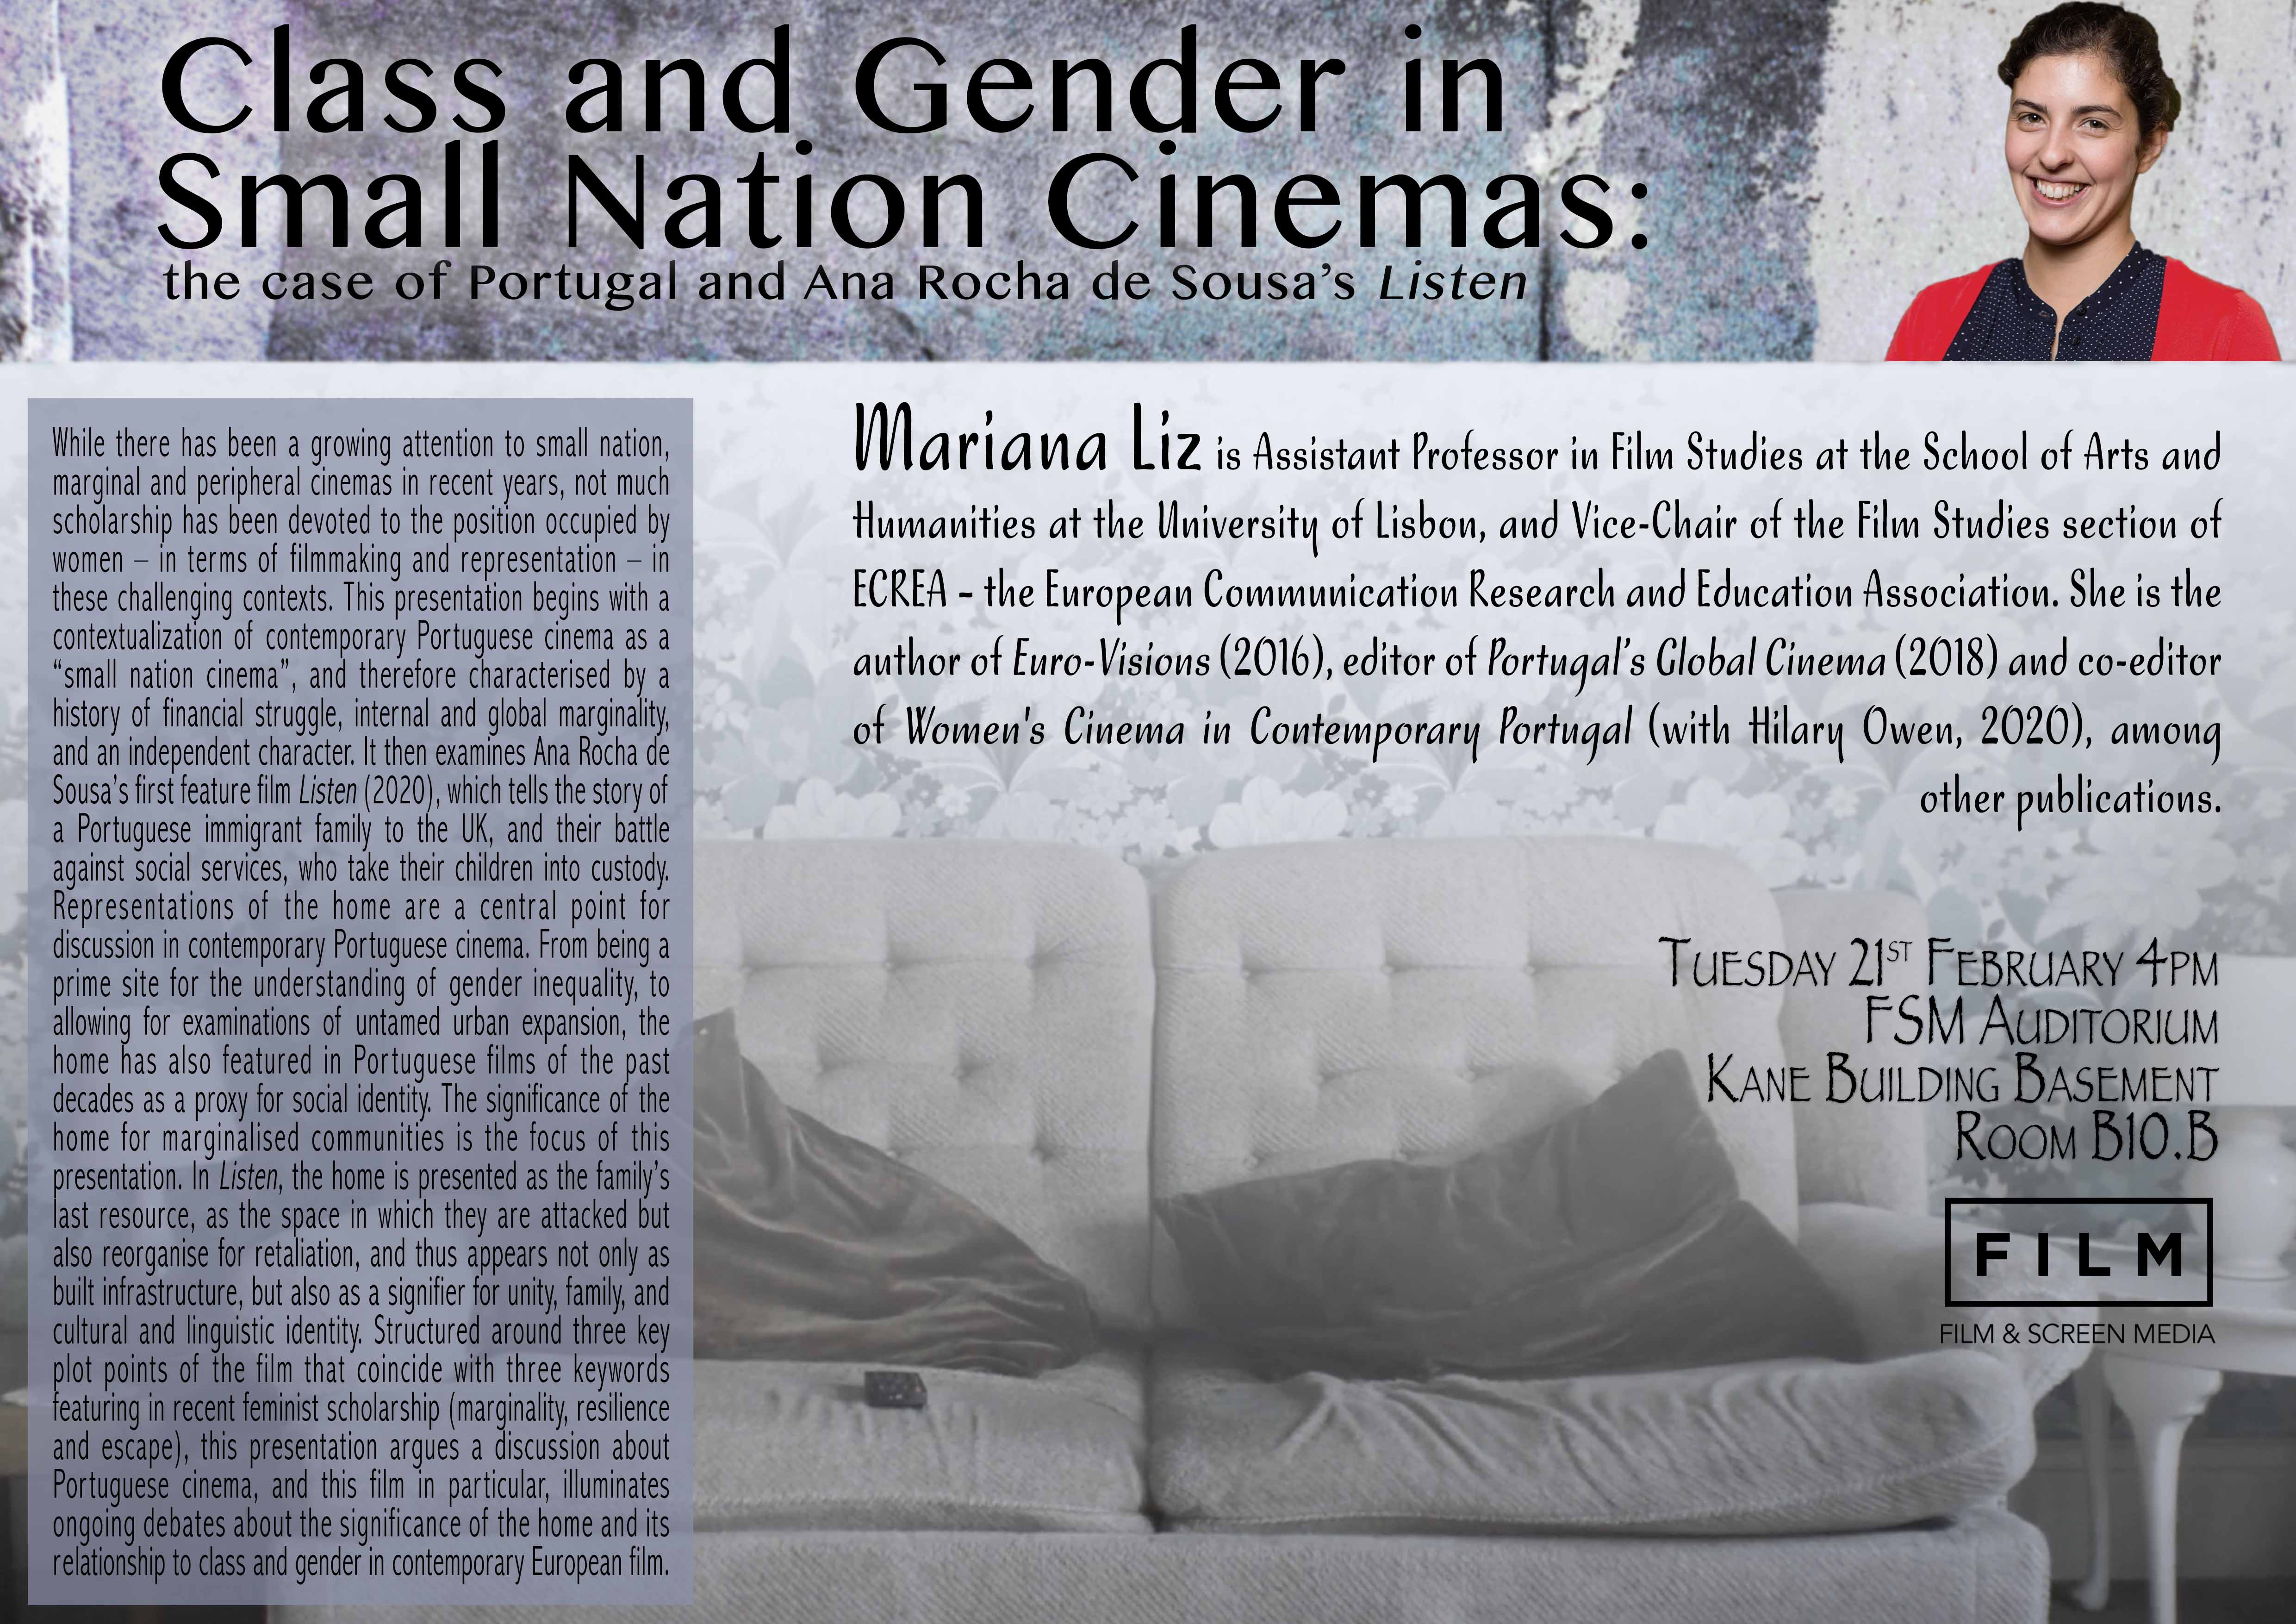 Mariana Liz - Class and Gender in Small Nation Cinemas. Tues 21st Feb @4pm